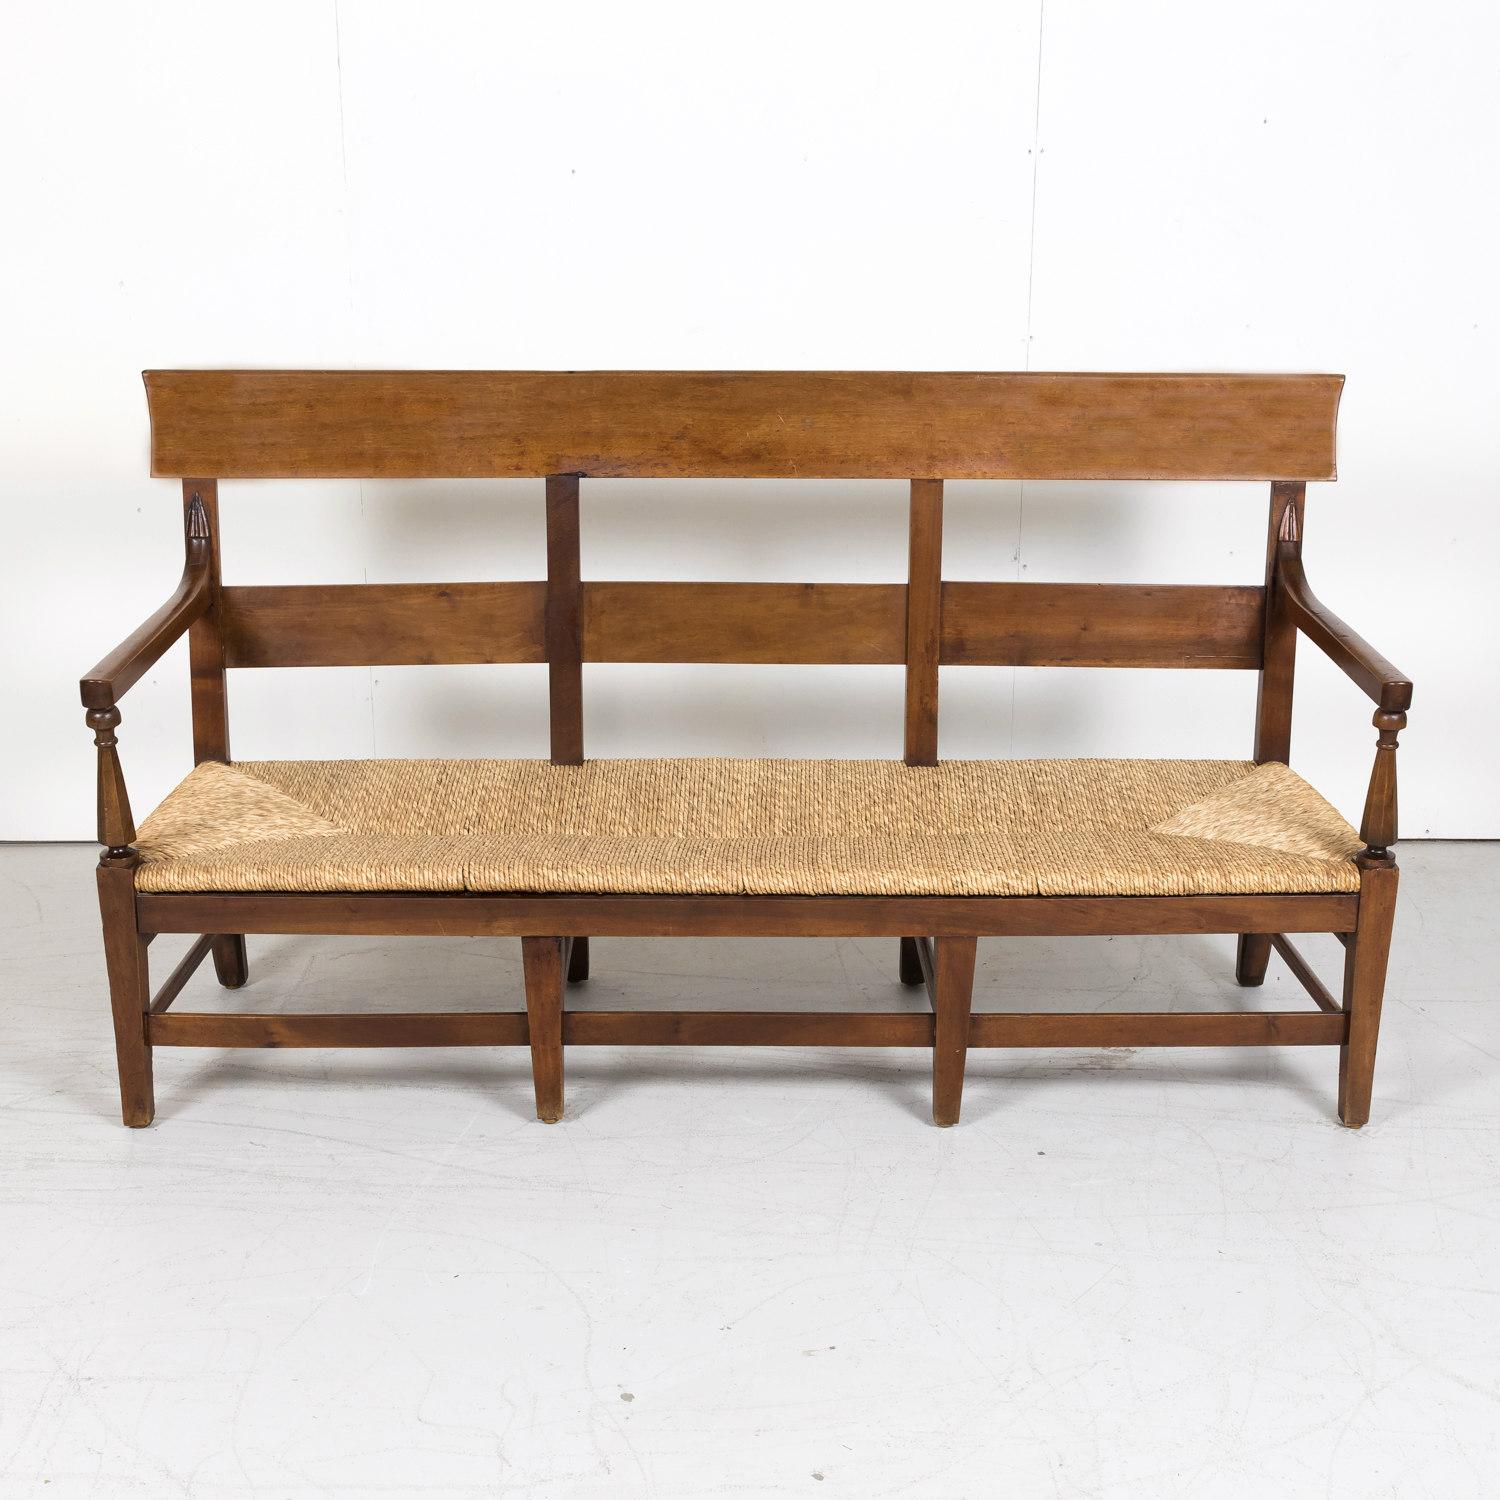 A handsome 18th century Country French Directoire period settee or radassier handcrafted in solid cherry near Marseille in the South of France, circa 1790s. This double arm bench seats three and features a handwoven rush seat, ladder-back, and